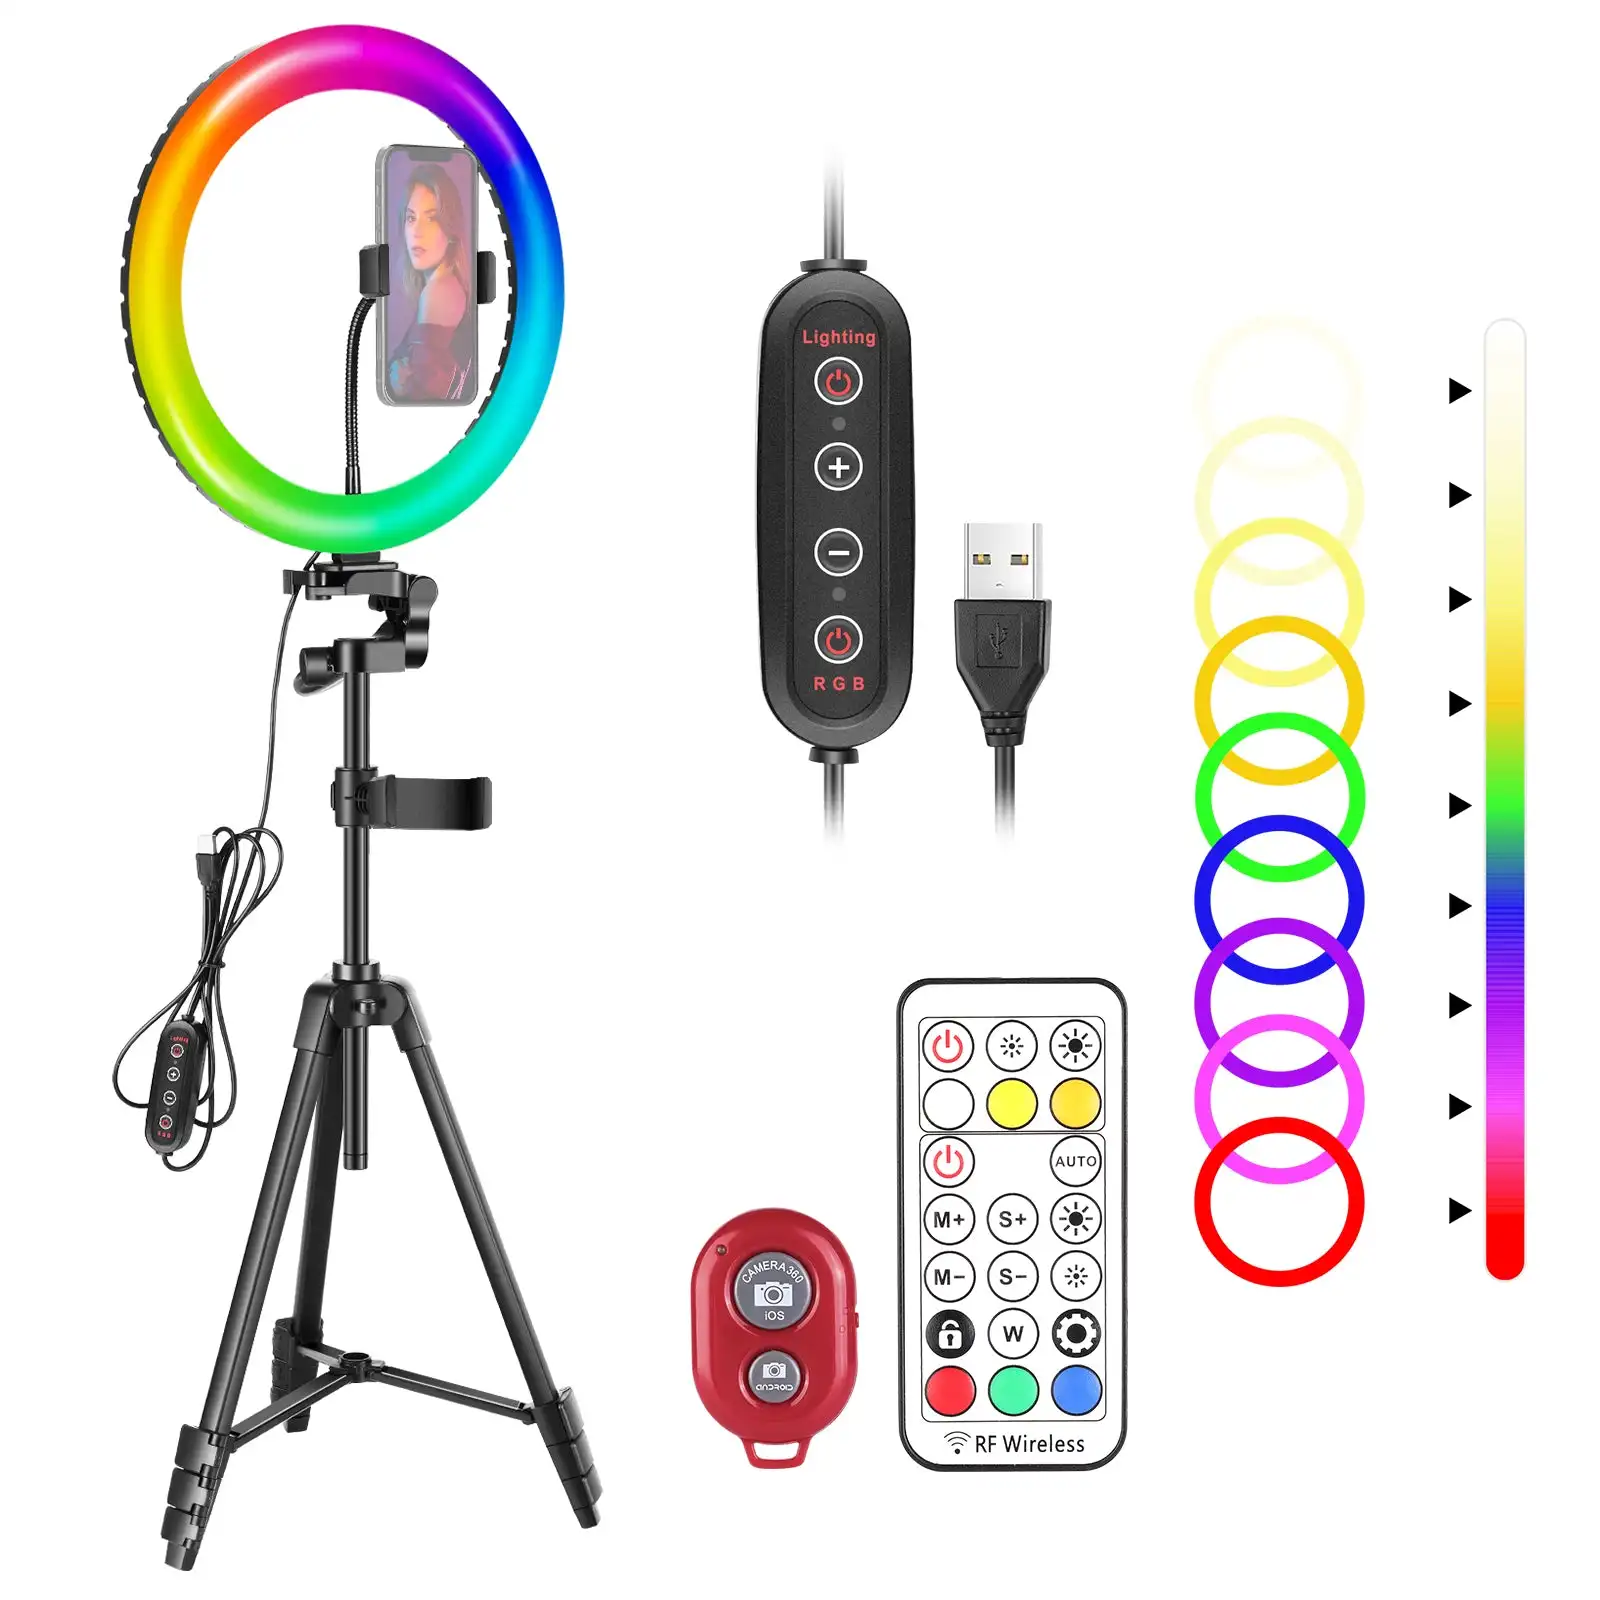 

NEEWER 10 inch RGB LED Ring Light USB Dimmable Photography Studio Fill Lamp With Tripod Stand & 433MHz Remote Control